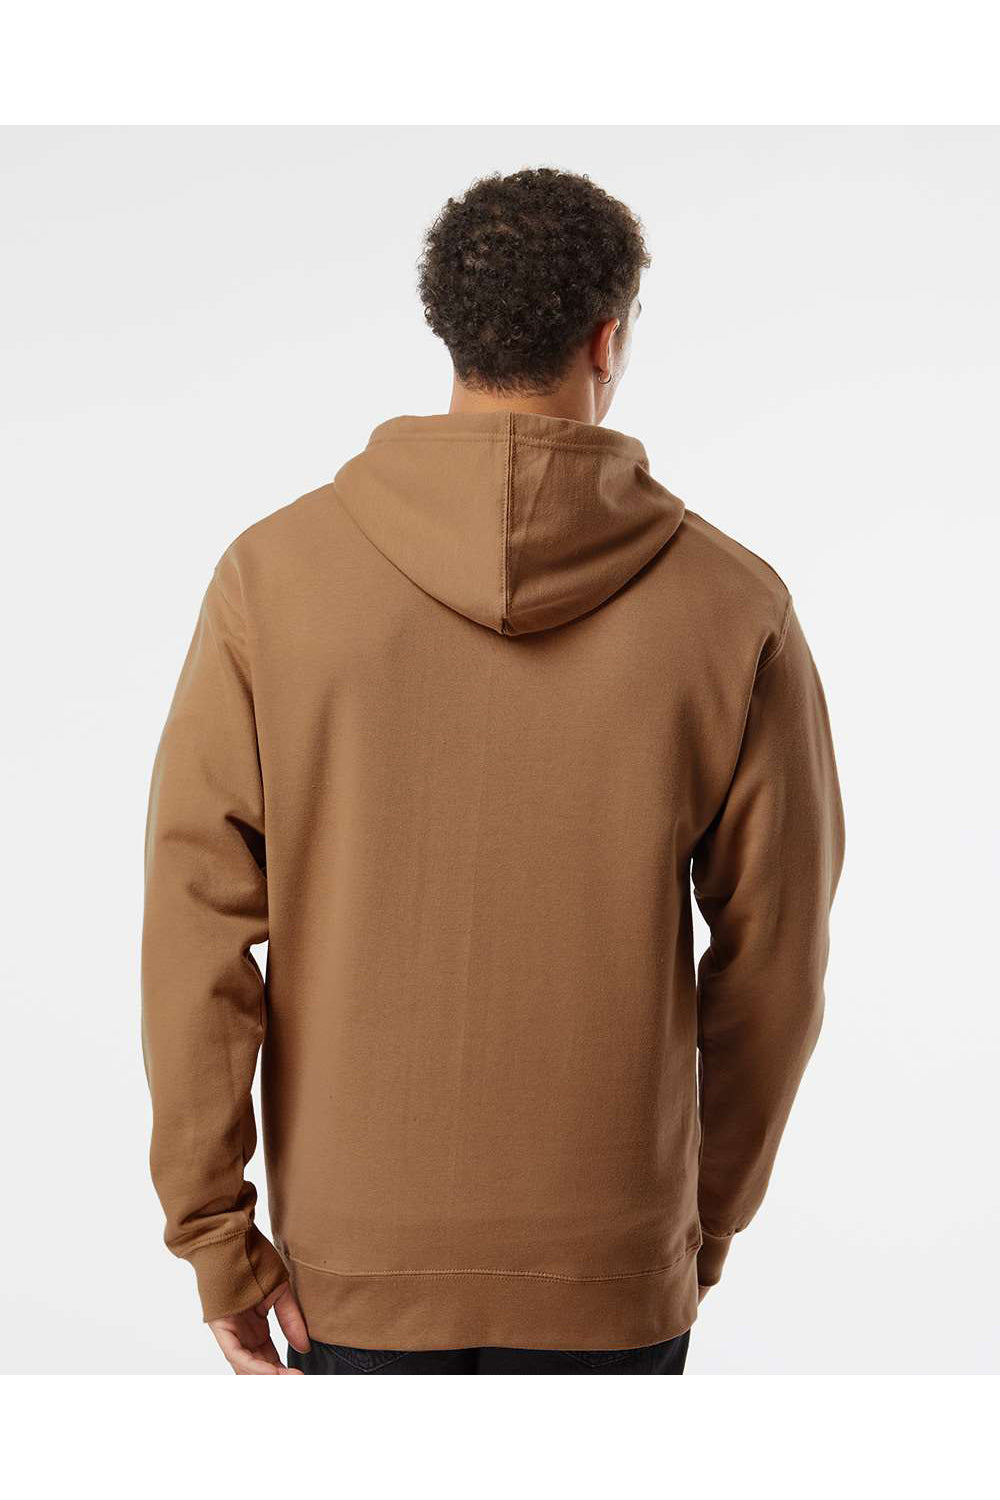 Independent Trading Co. SS4500 Mens Hooded Sweatshirt Hoodie Saddle Brown Model Back